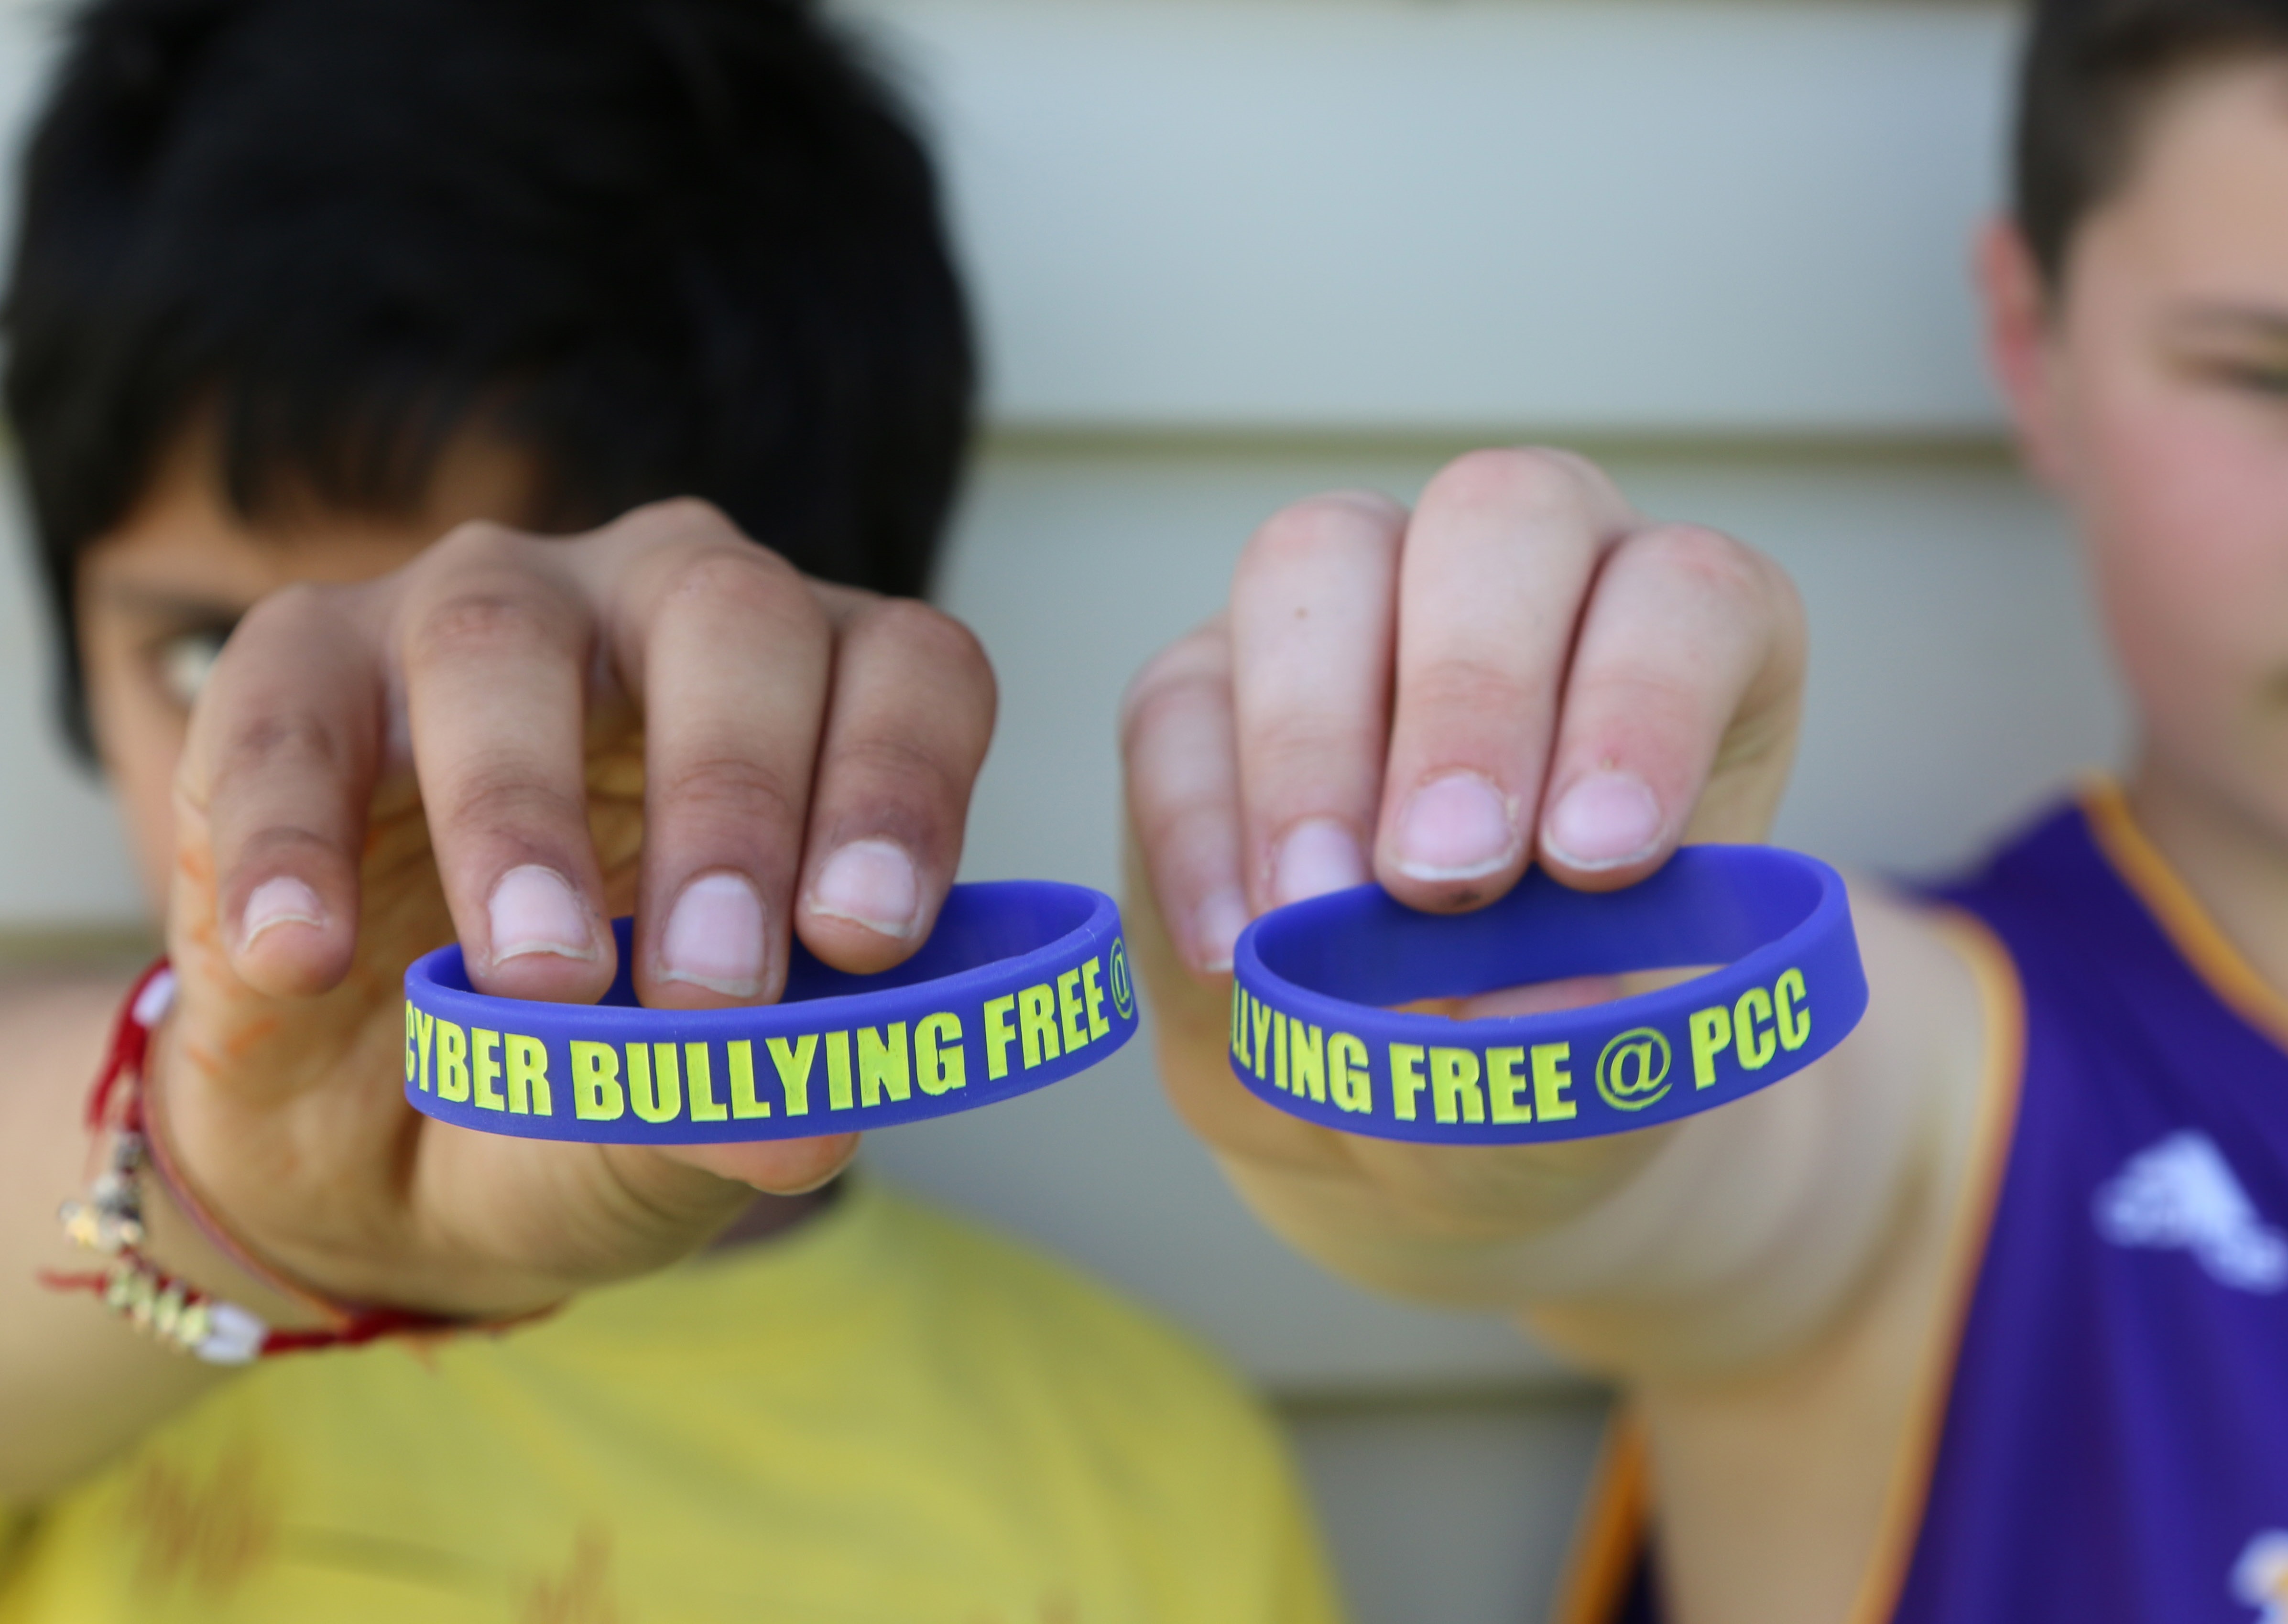 Cyber bullying free wristbands